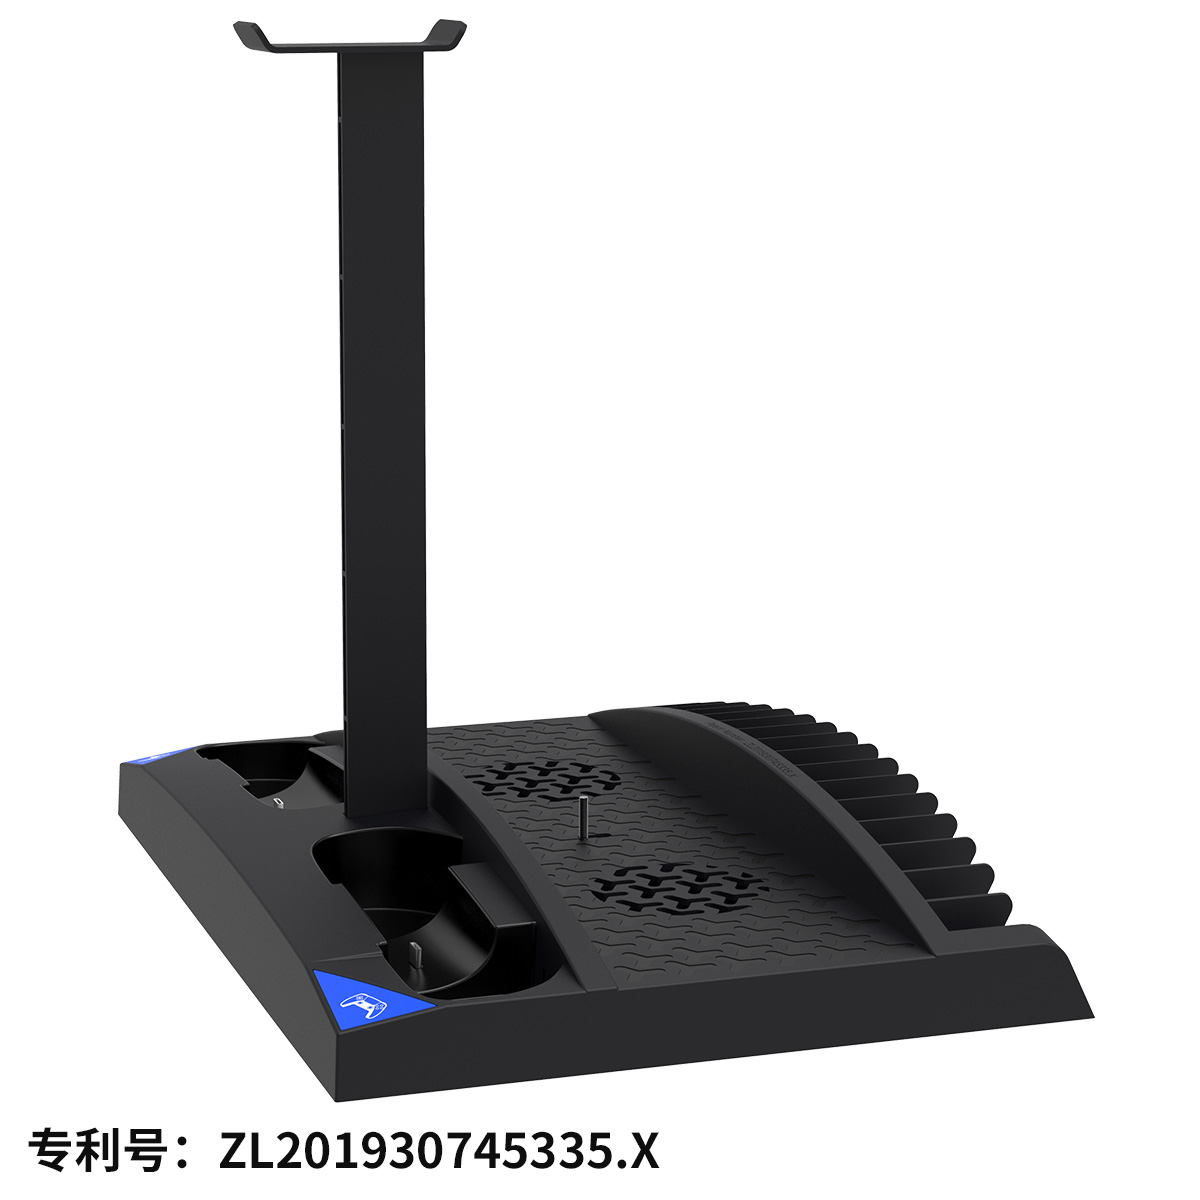 PG-p5013 P5 charging and cooling base